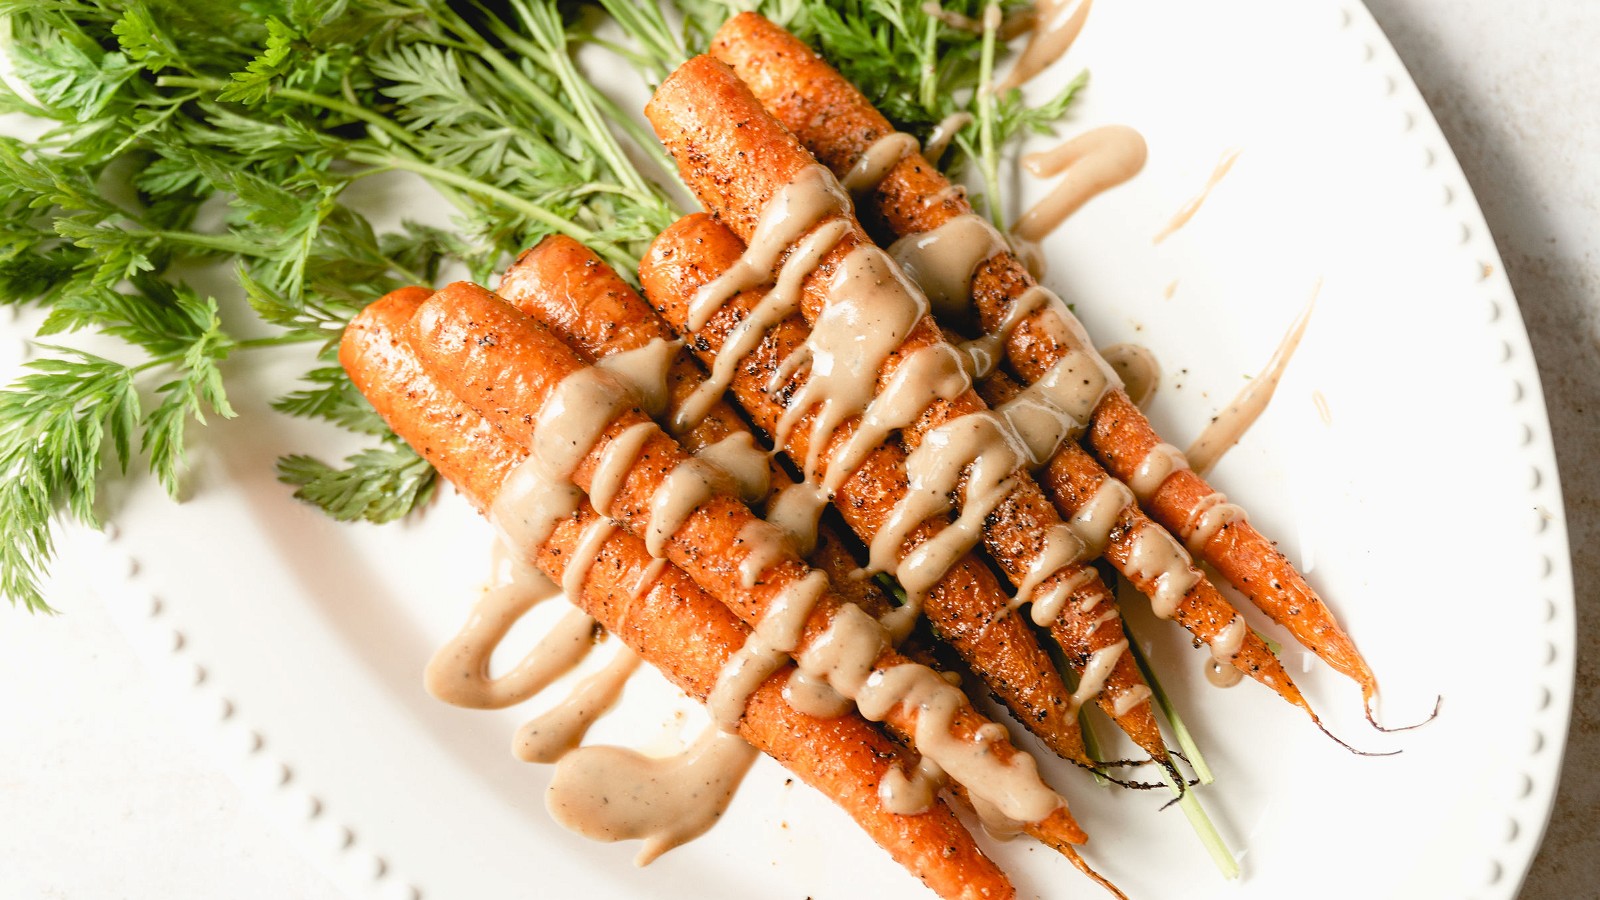 Image of Roasted Carrots with Dijon Balsamic Dressing